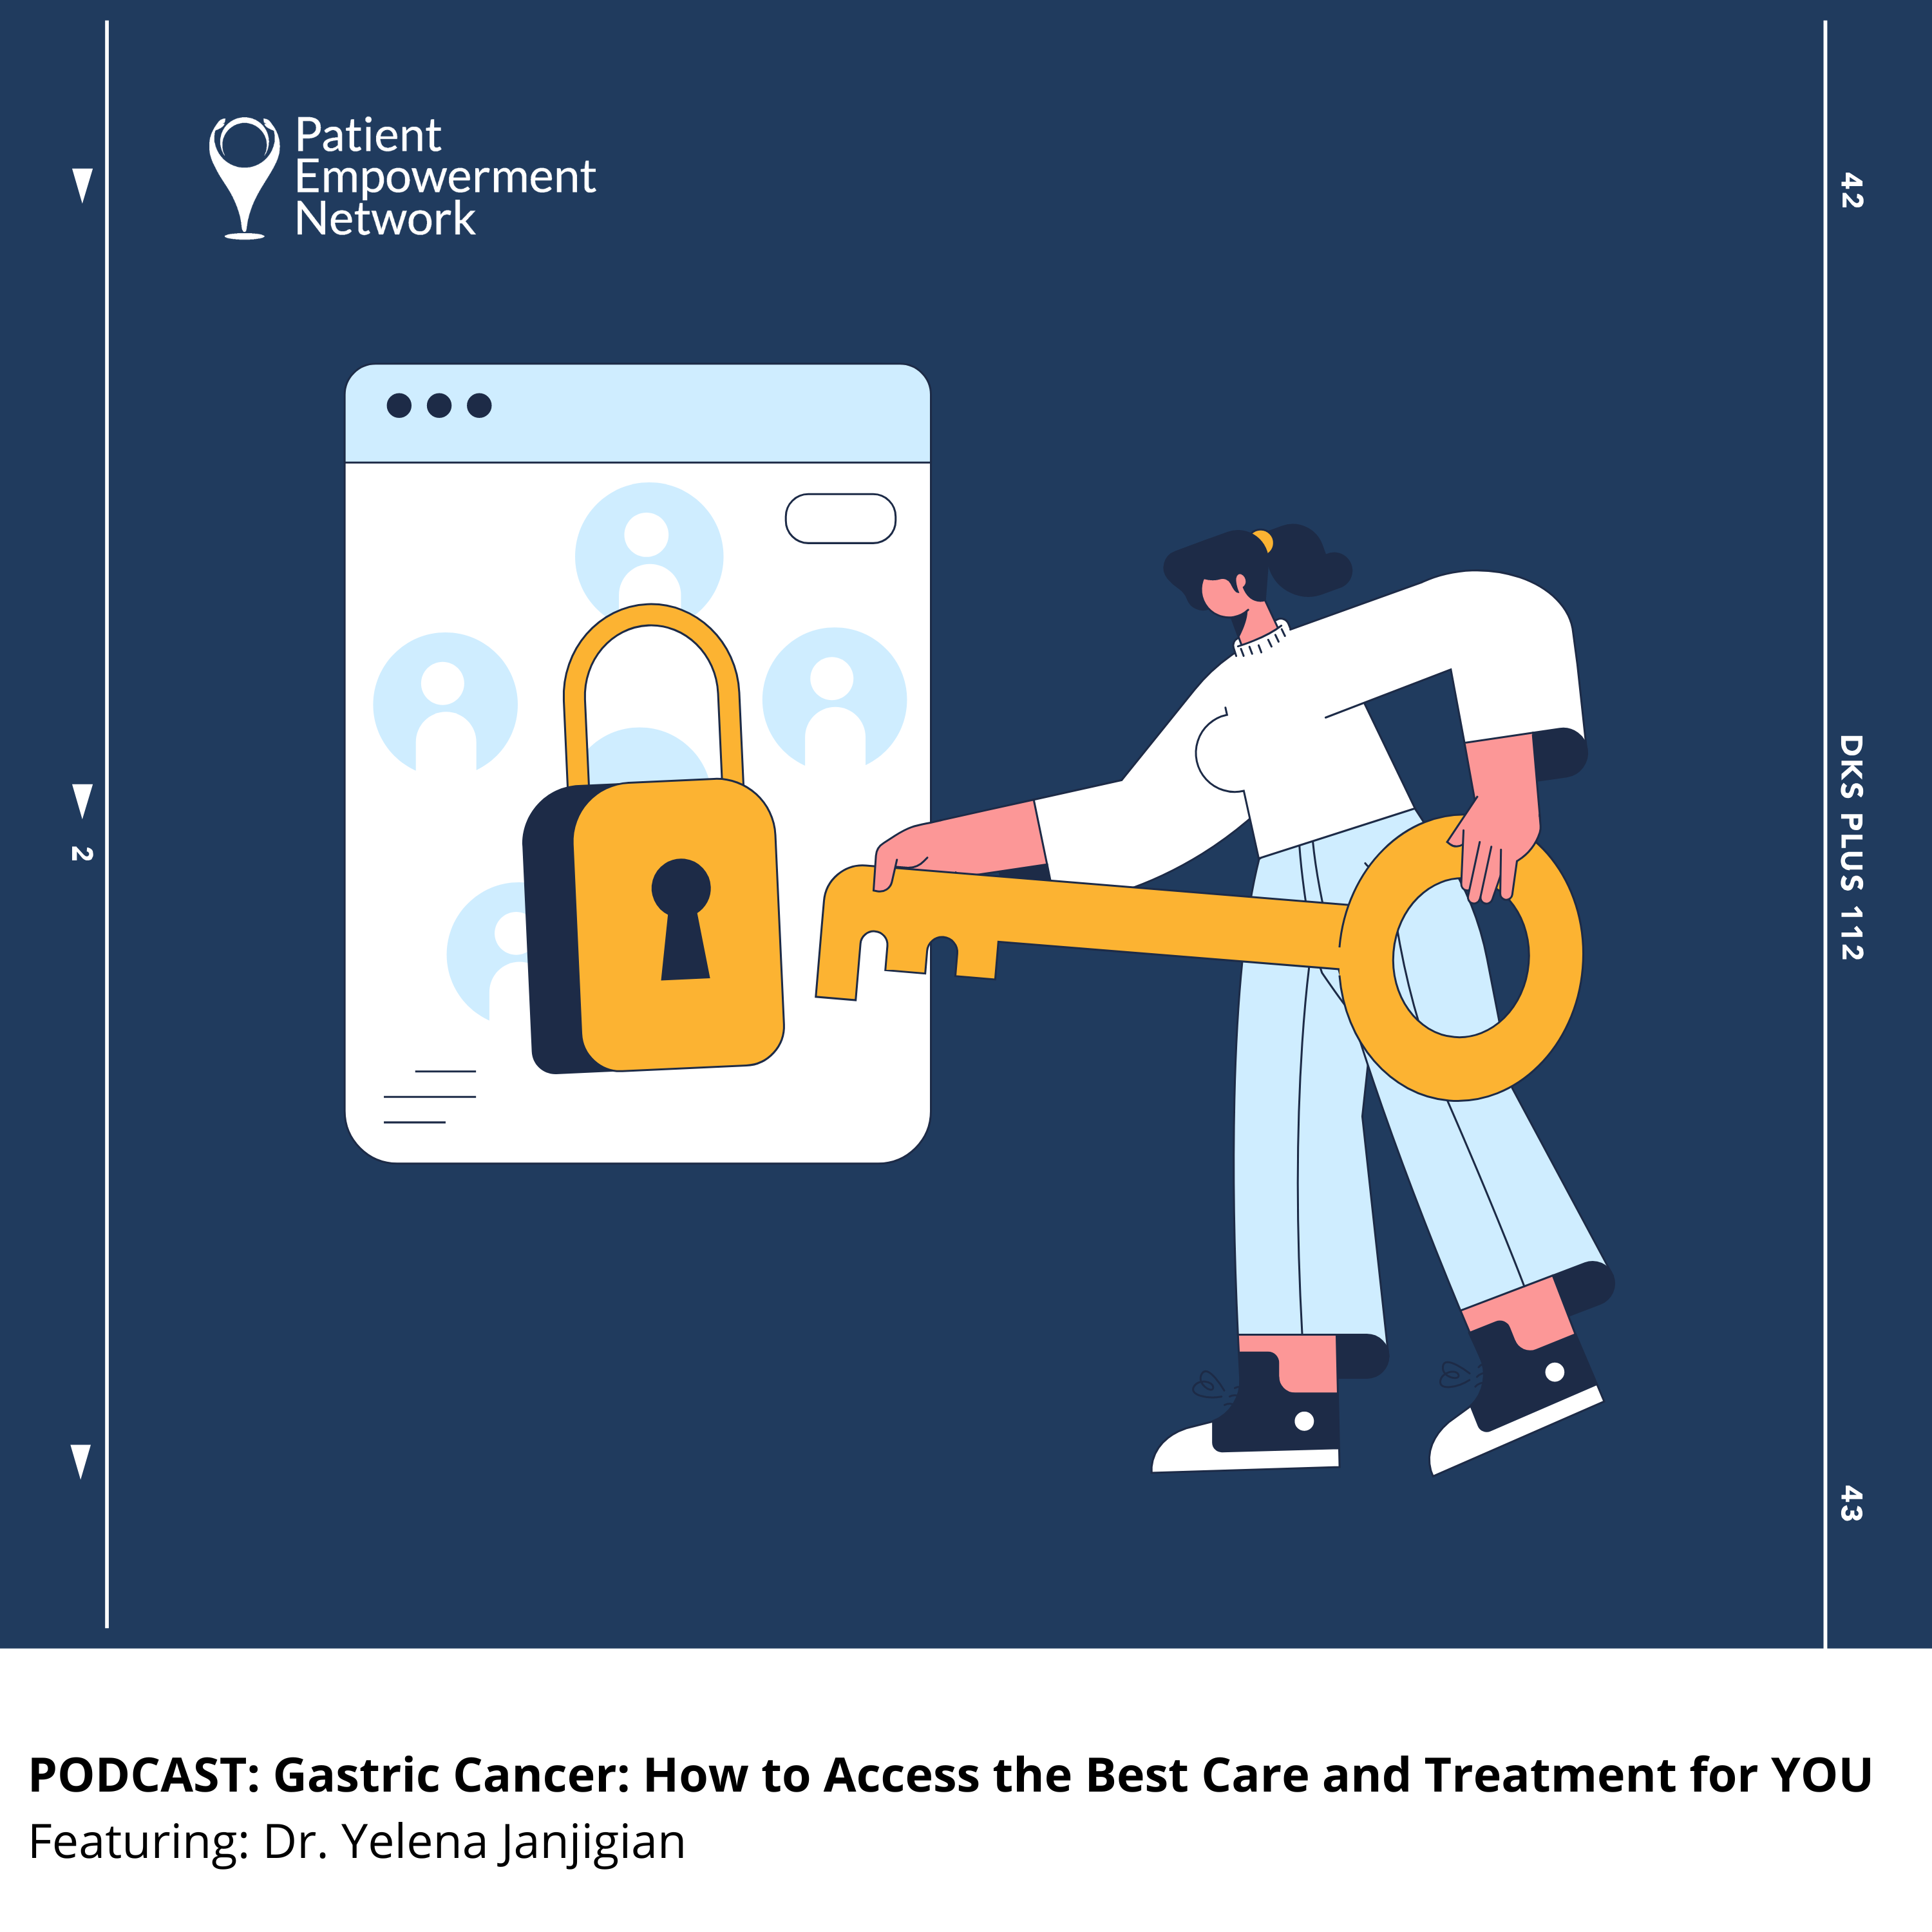 PODCAST: Gastric Cancer How to Access the Best Care and Treatment for YOU